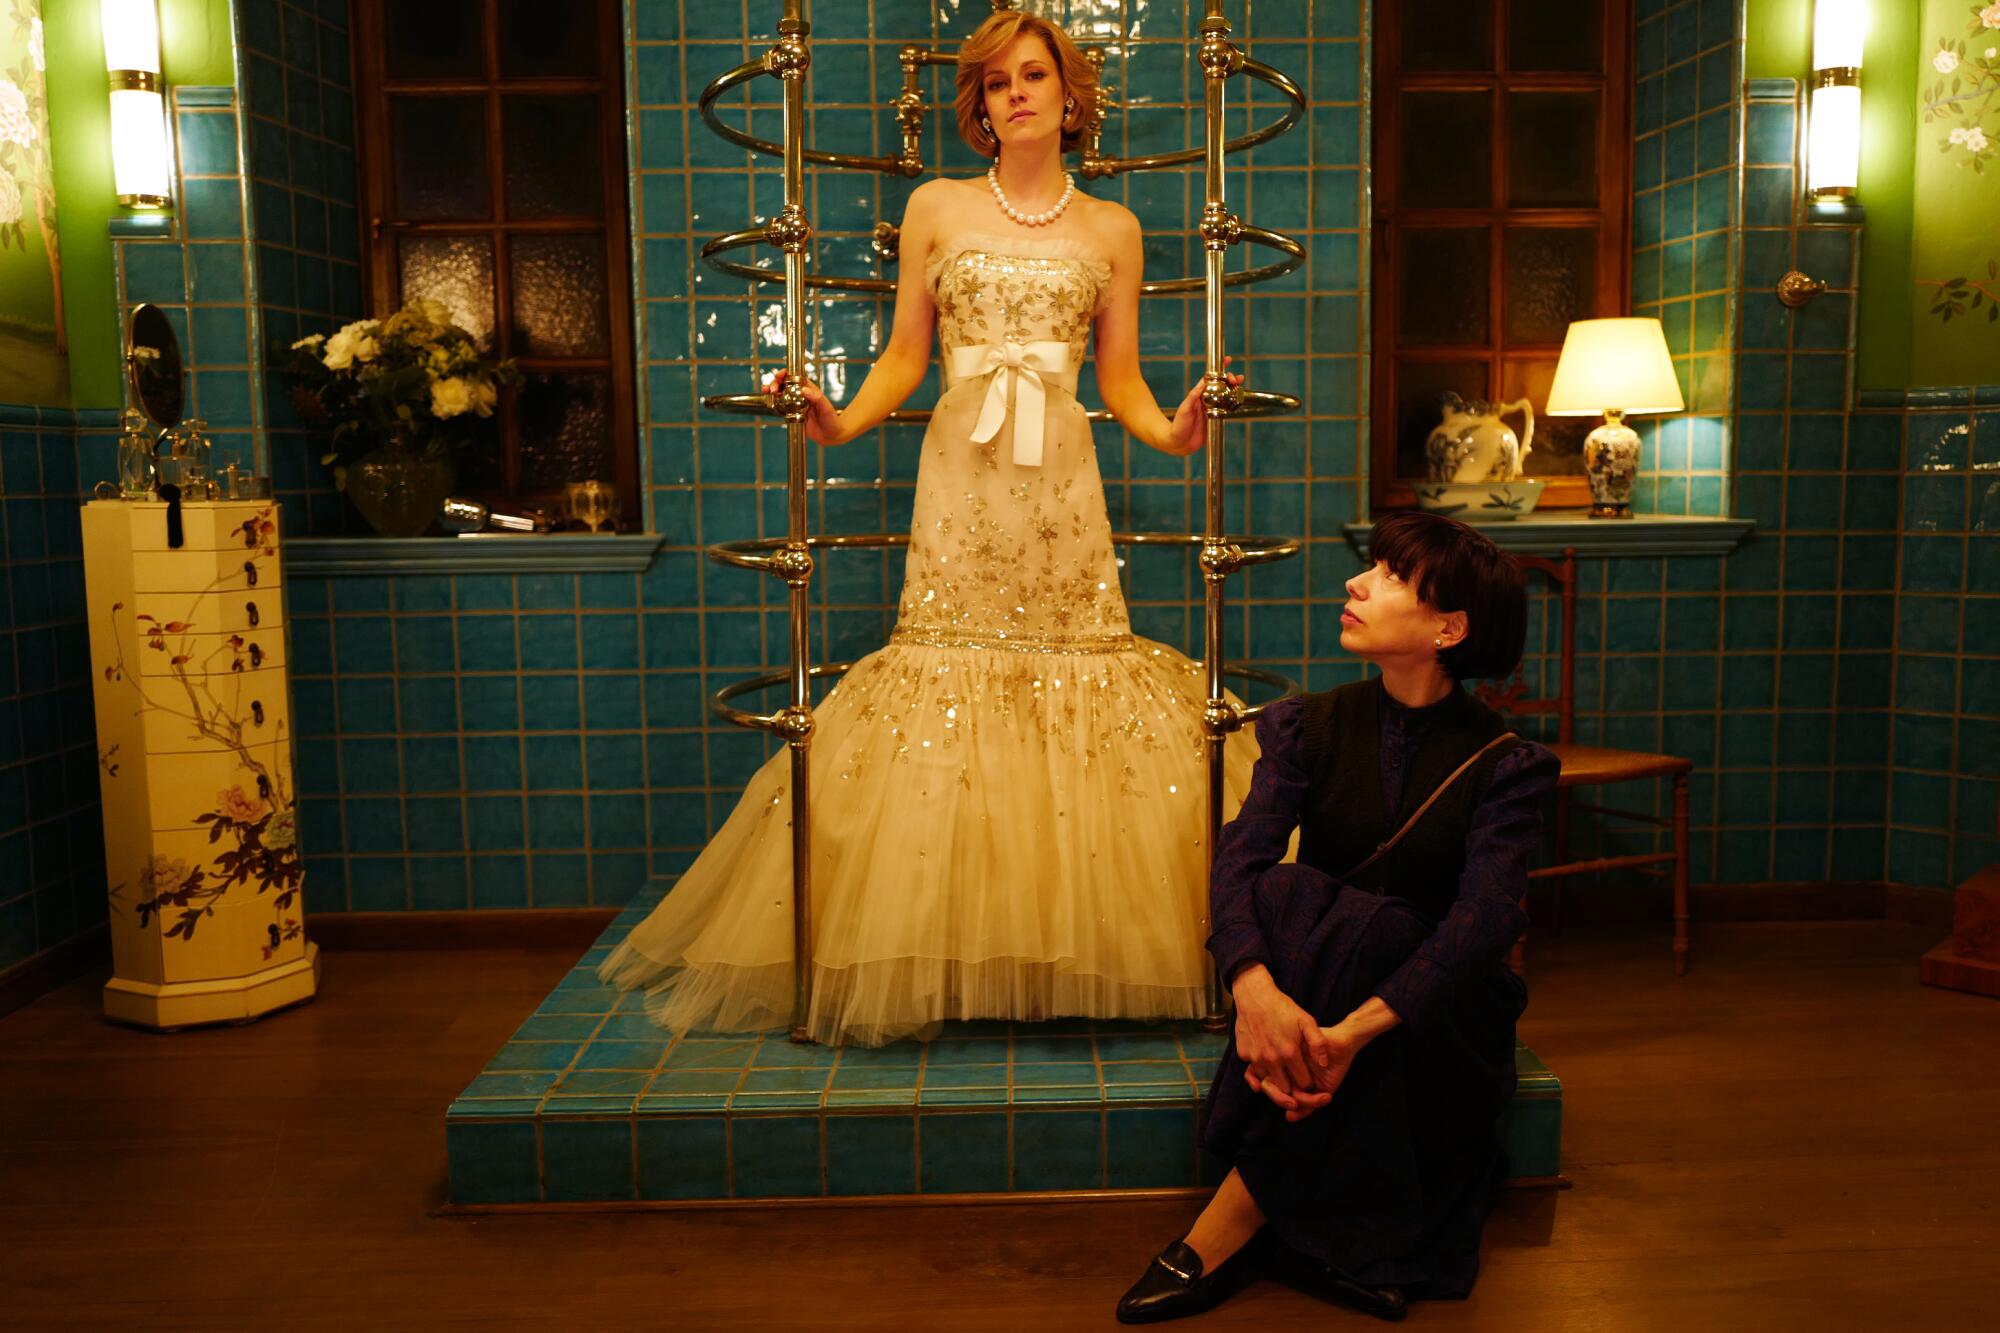 Kristen Stewart wears a gown with pearls as Princess Diana in “Spencer" with Sally Hawkins as Maggie.